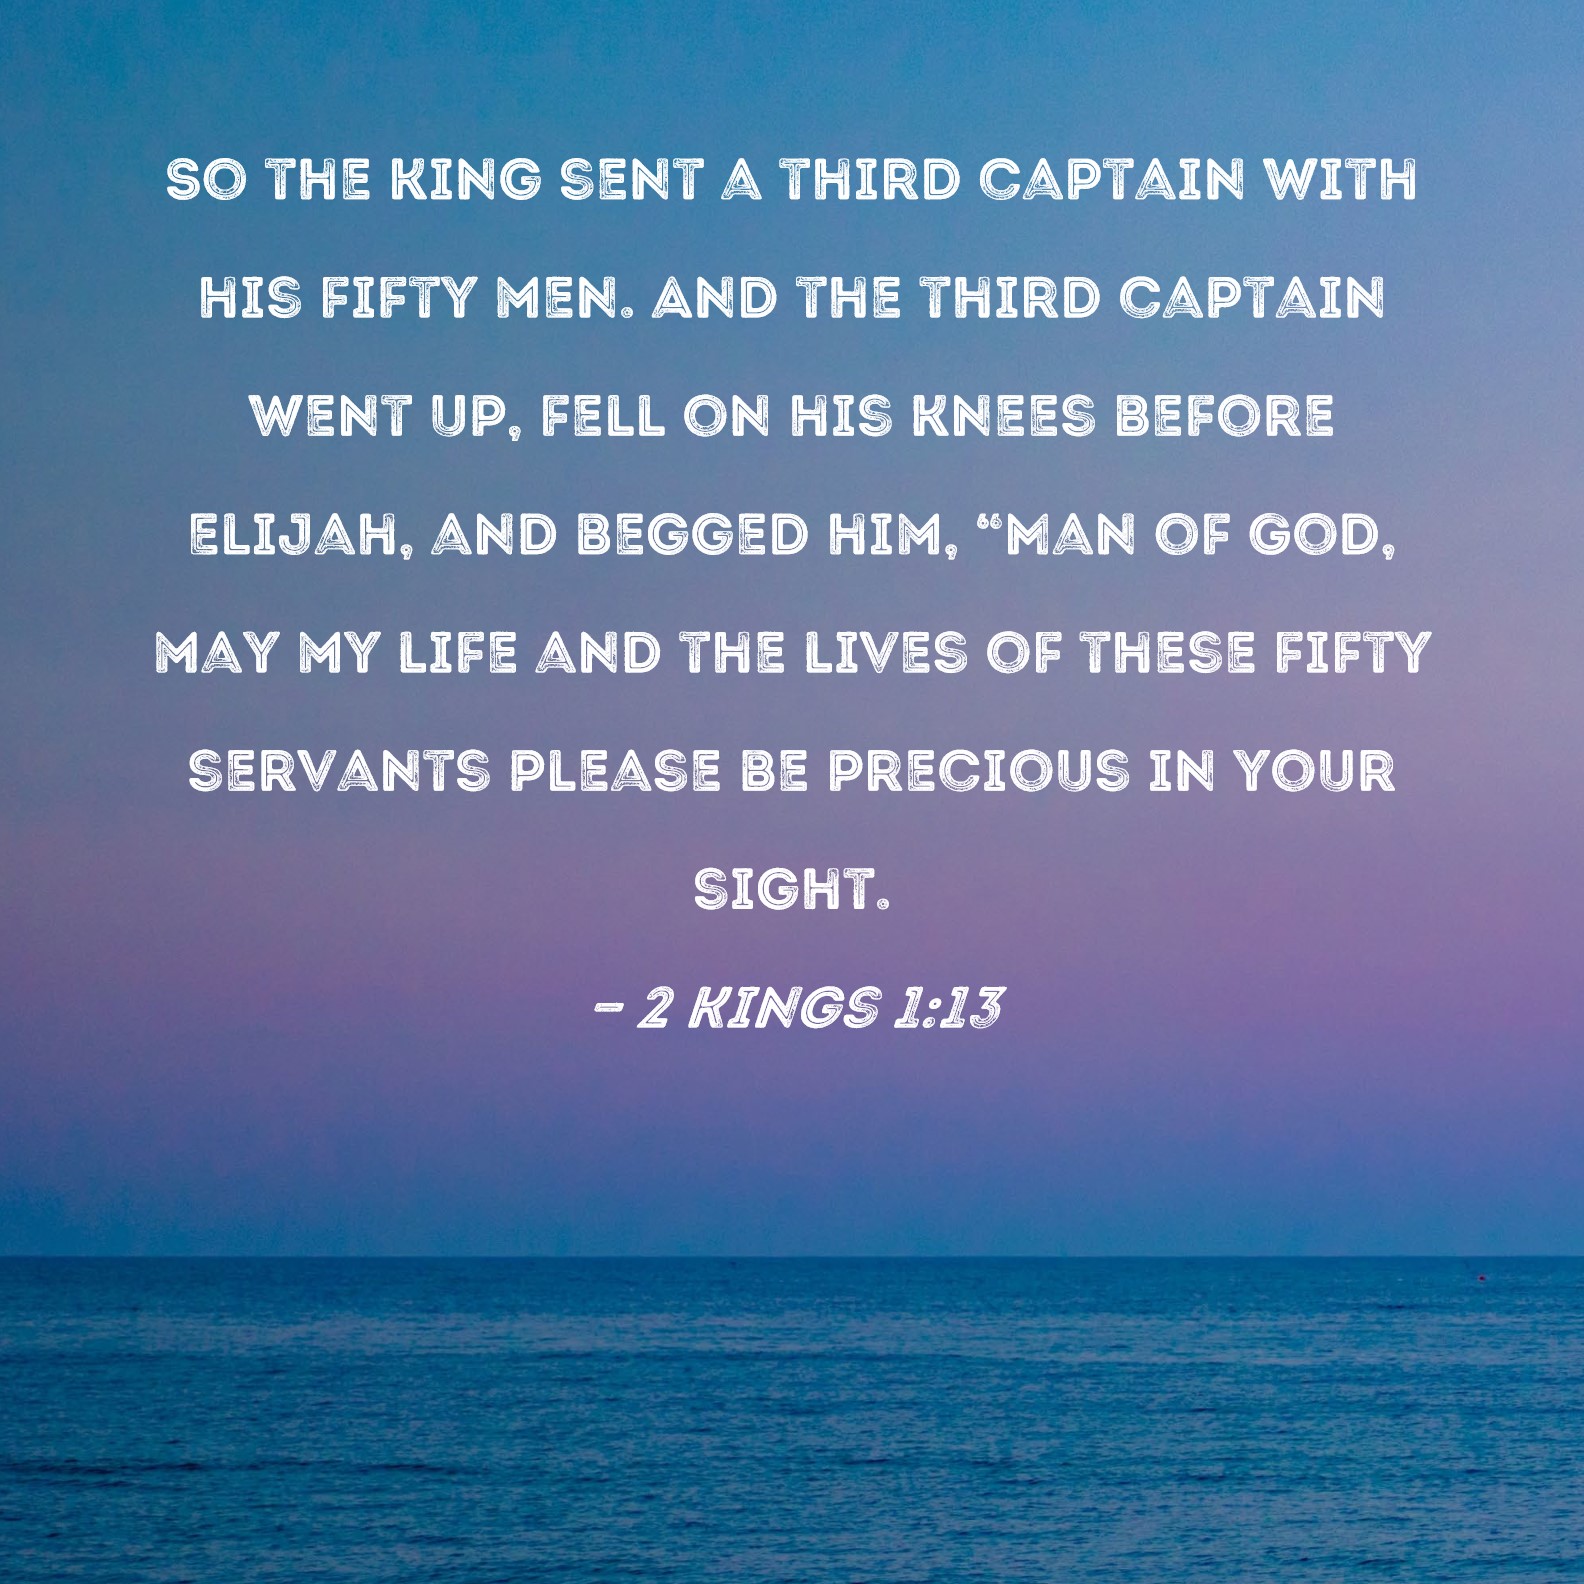 2 Kings 1:13 So the king sent a third captain with his fifty men